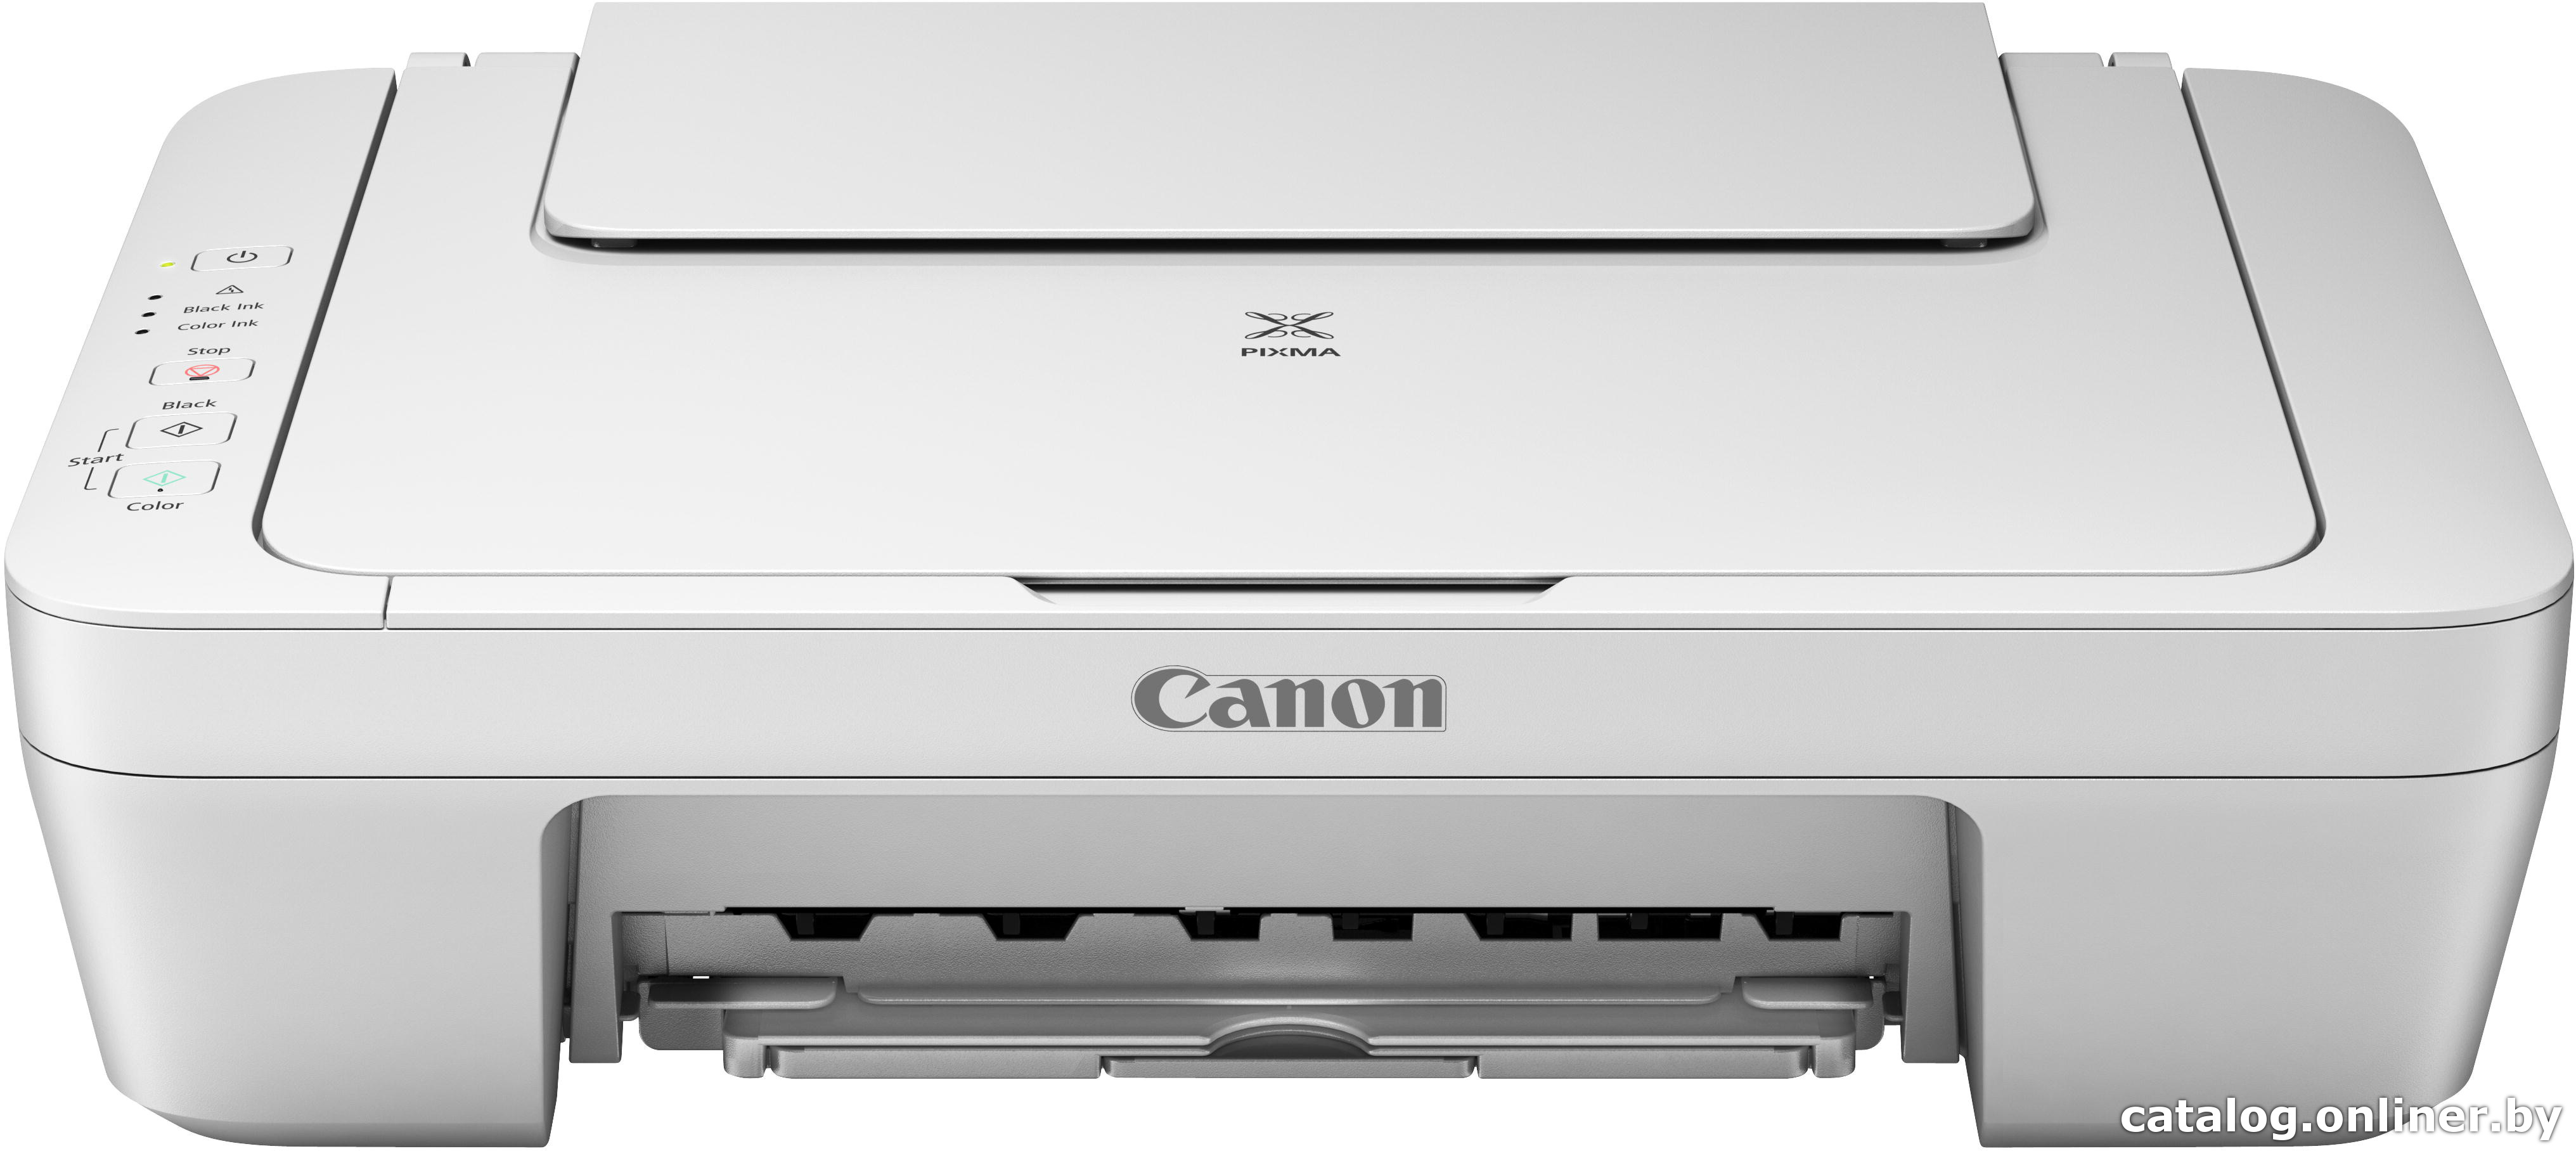 Canon MG2550S Scanner Driver Mac Sierra 10.12 How to Download and Install - Featured